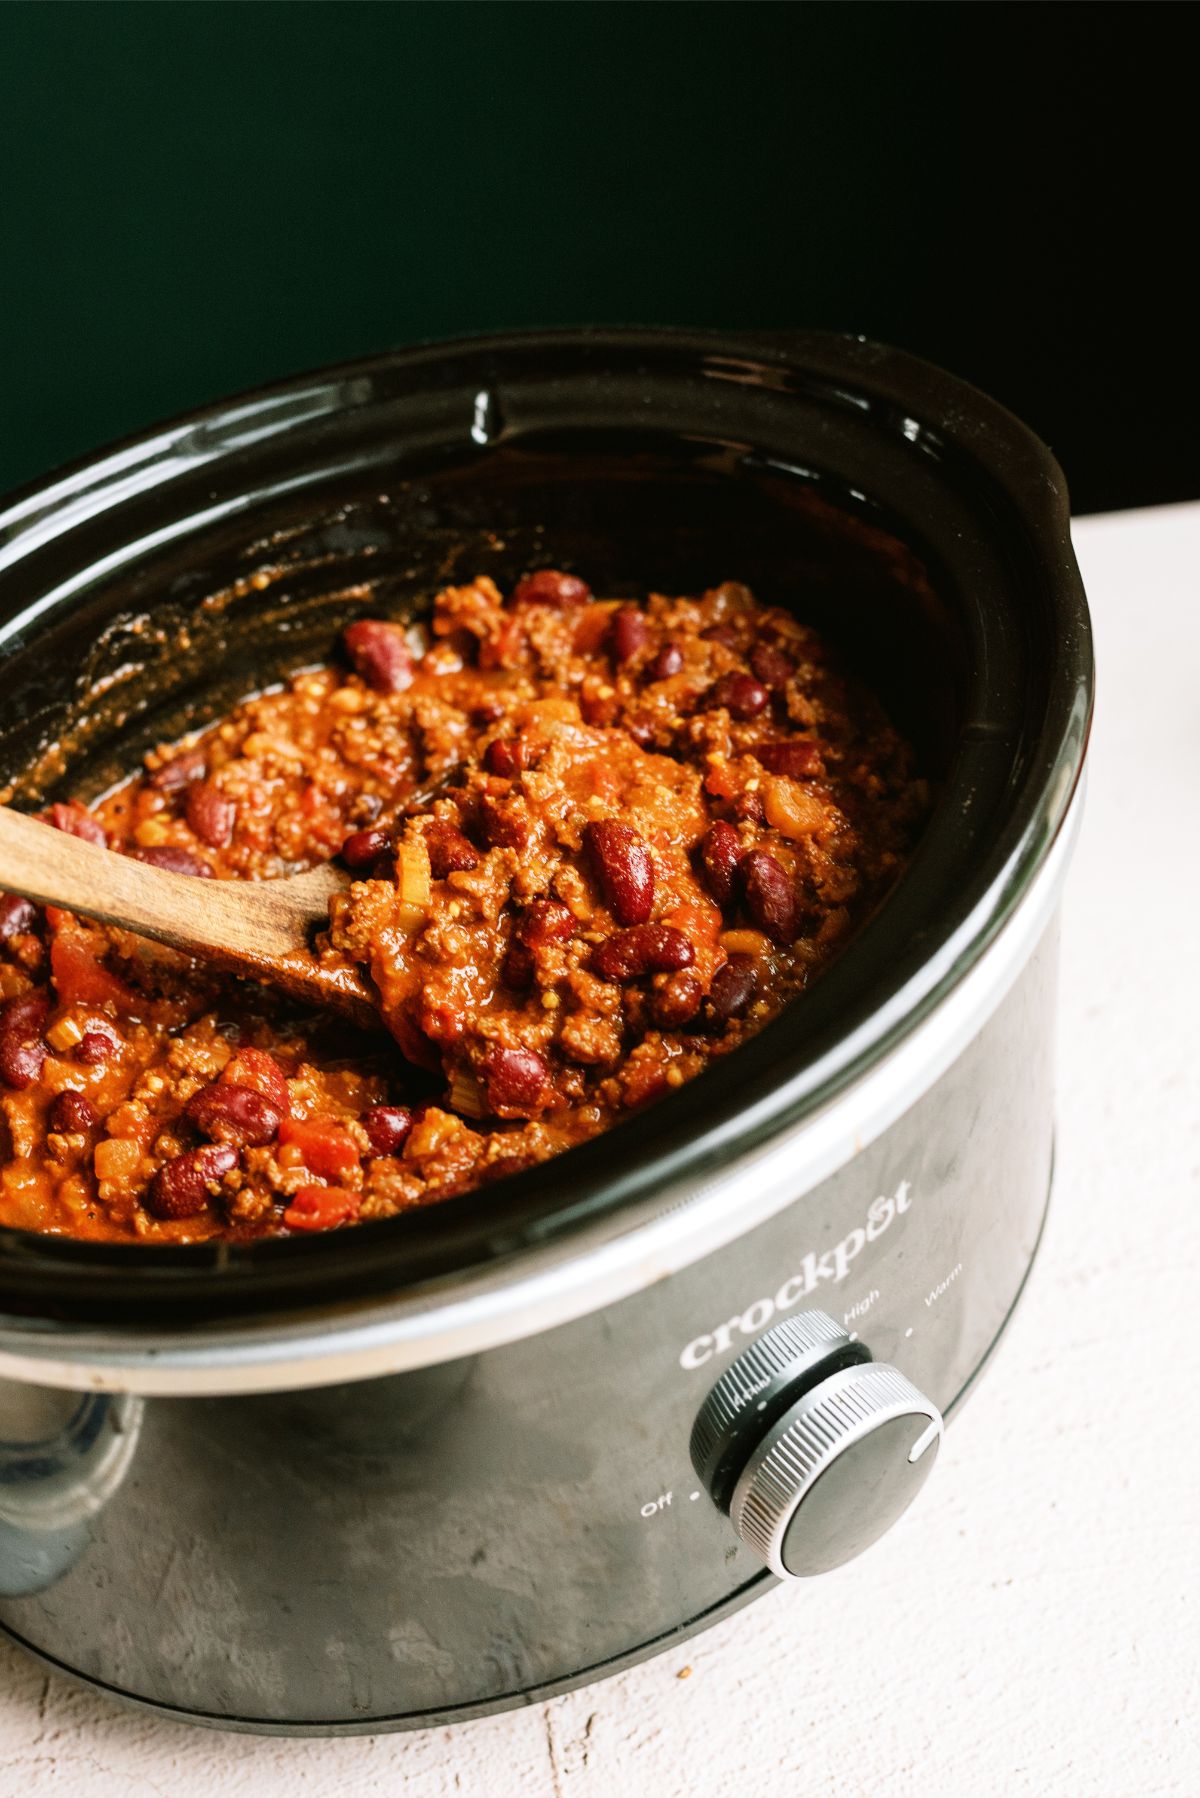 Mom's Slow Cooker Chili in the slow cooker with a wooden spoon